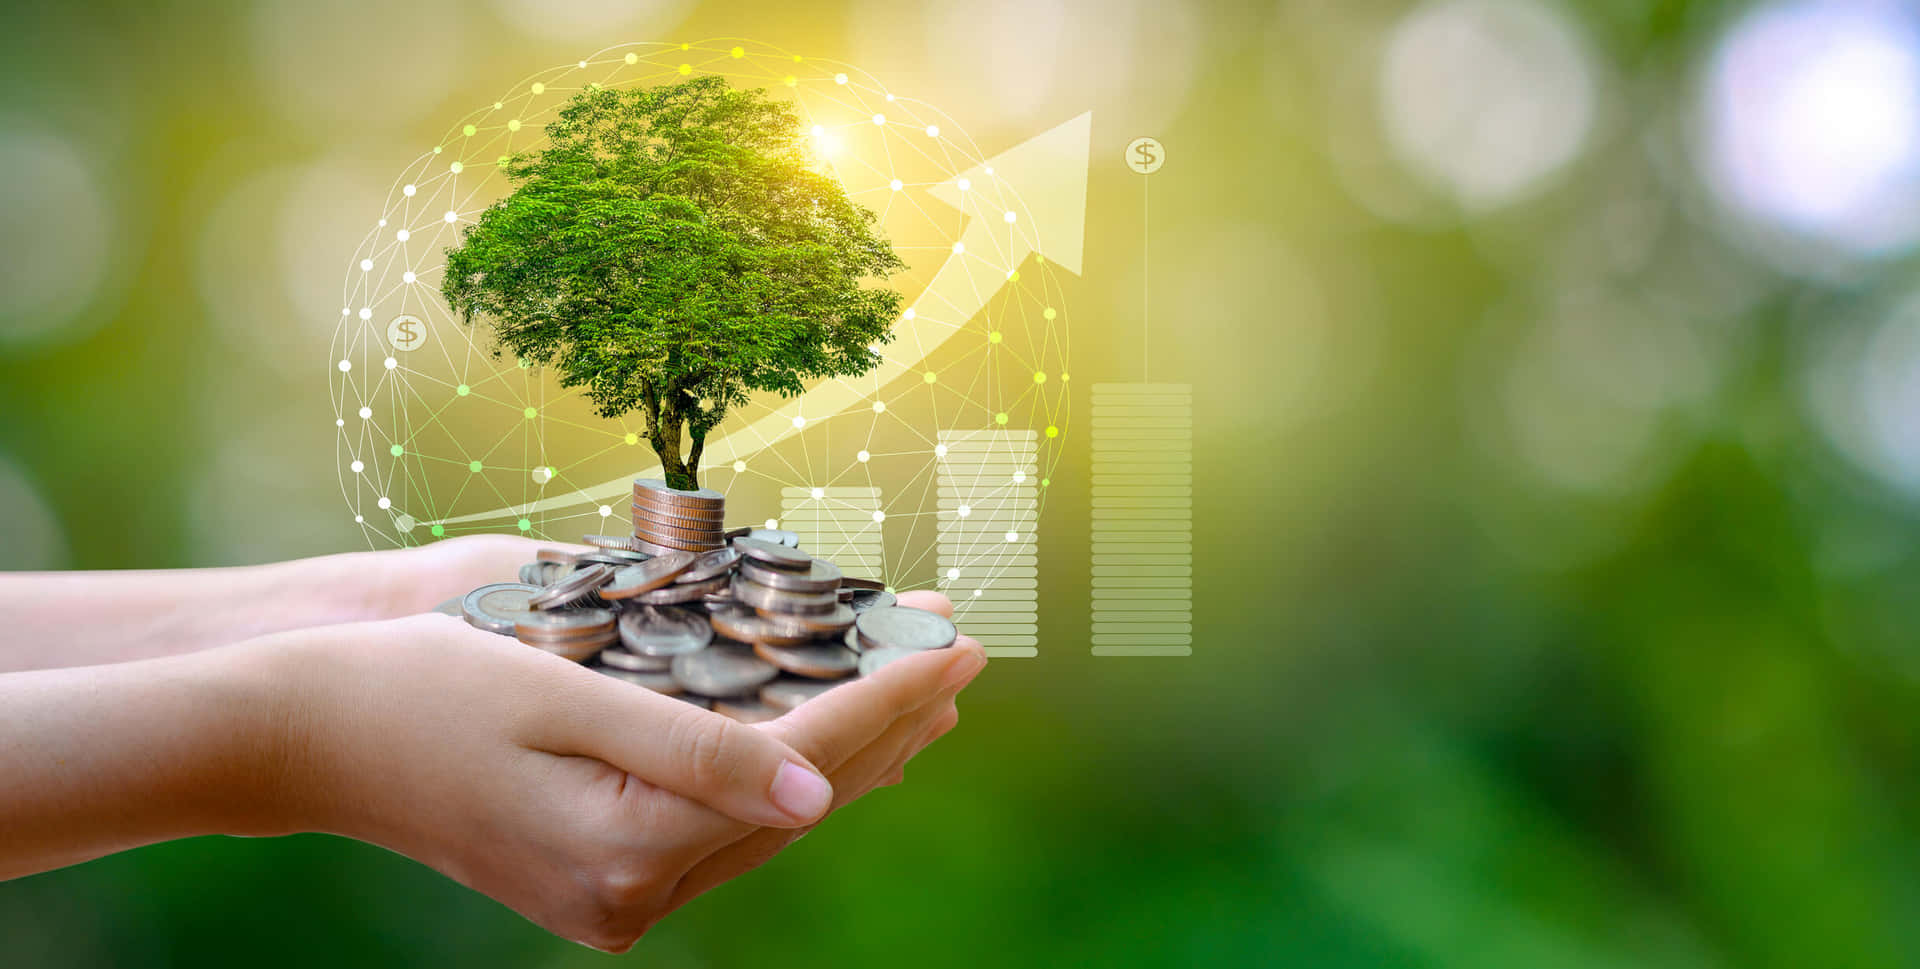 Caption: Green Economy: Ecosystem and Business Growth Wallpaper